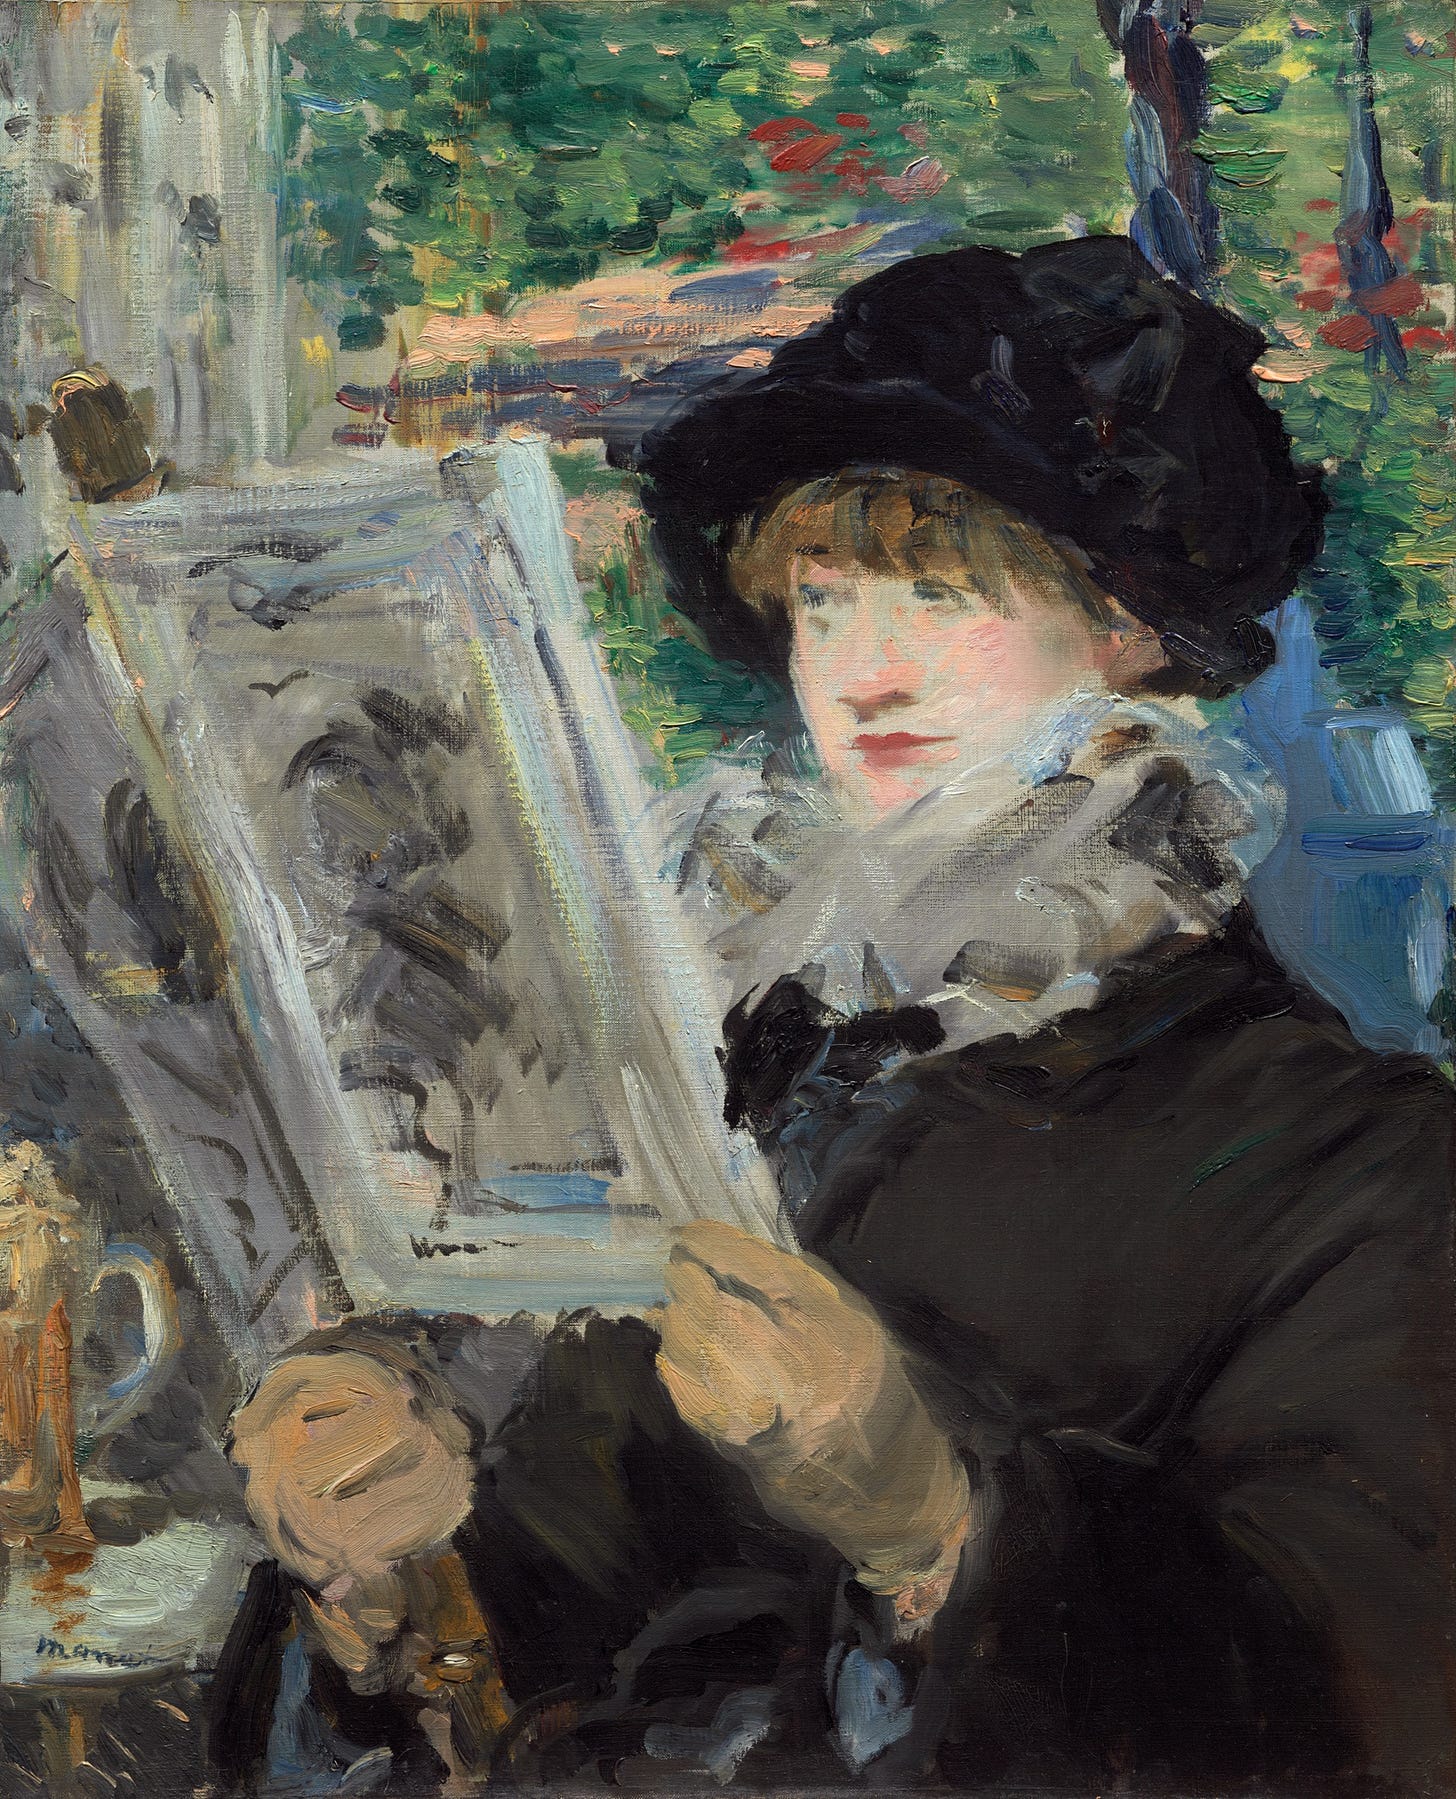 Edouard Manet's painting, "Woman Reading"